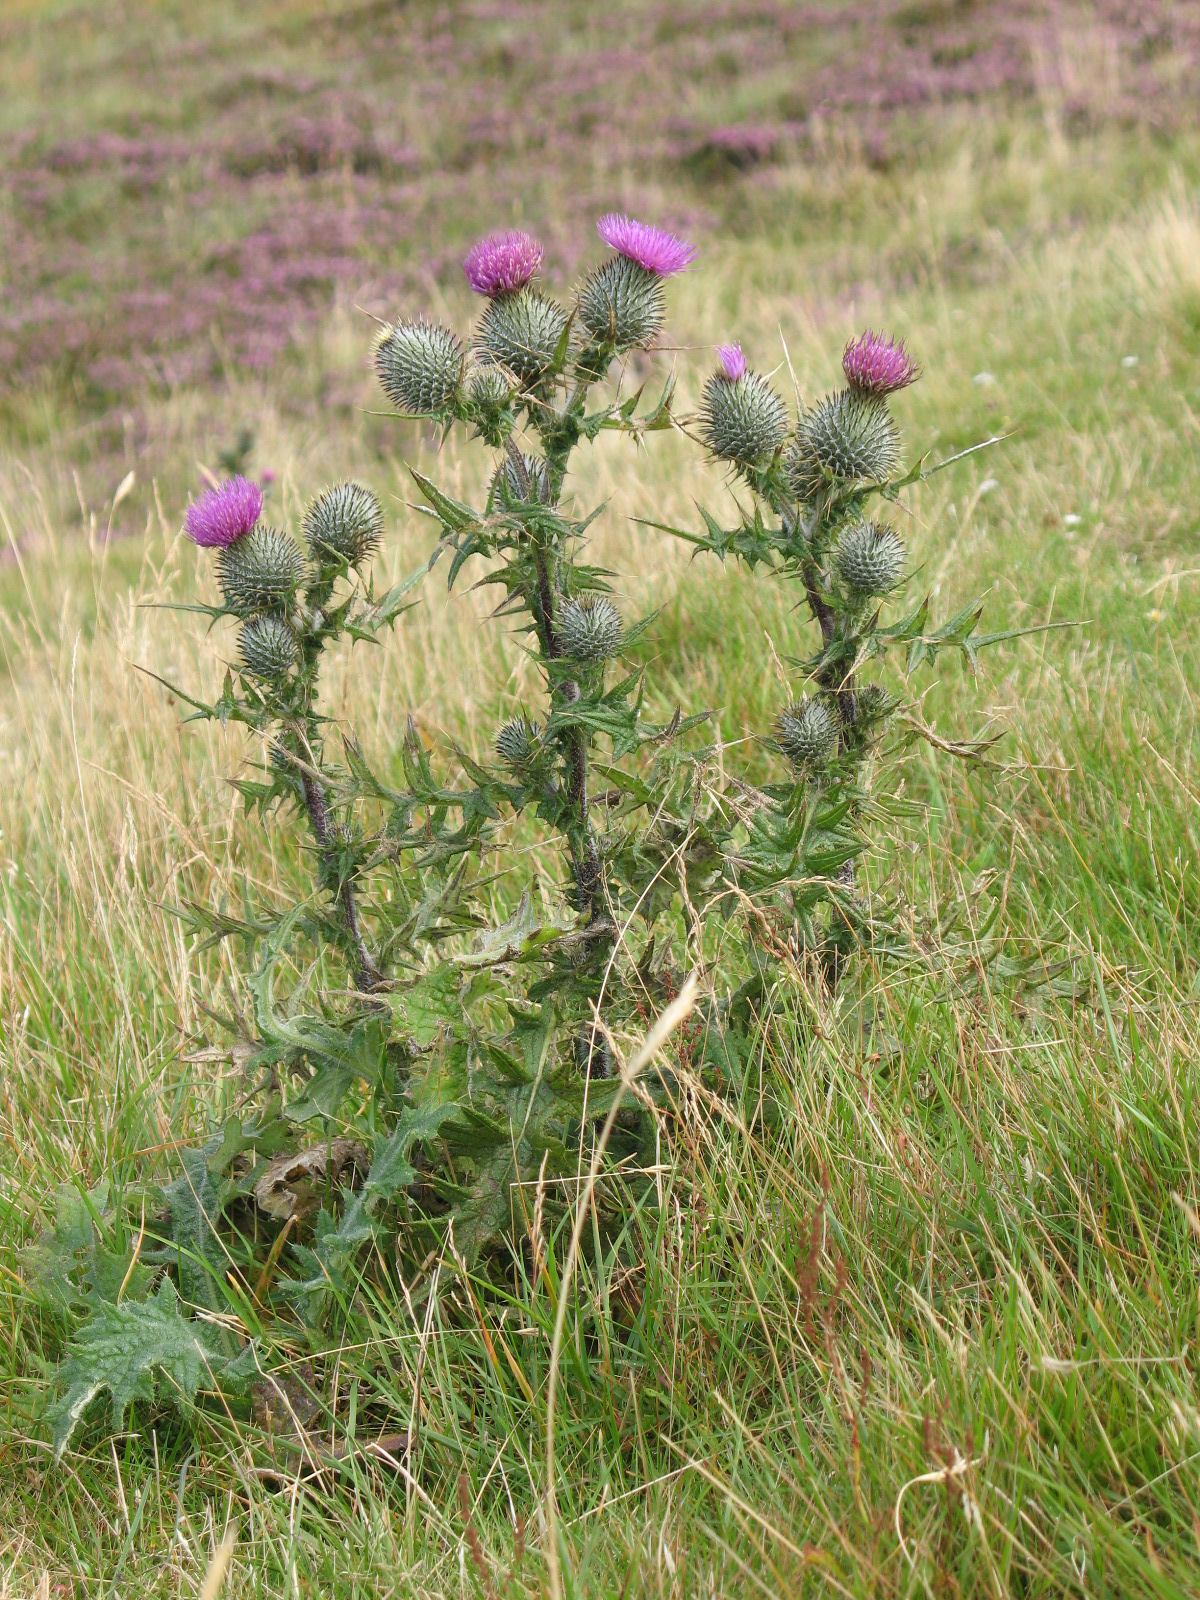 File:Thistle 1 - Wikimedia Commons